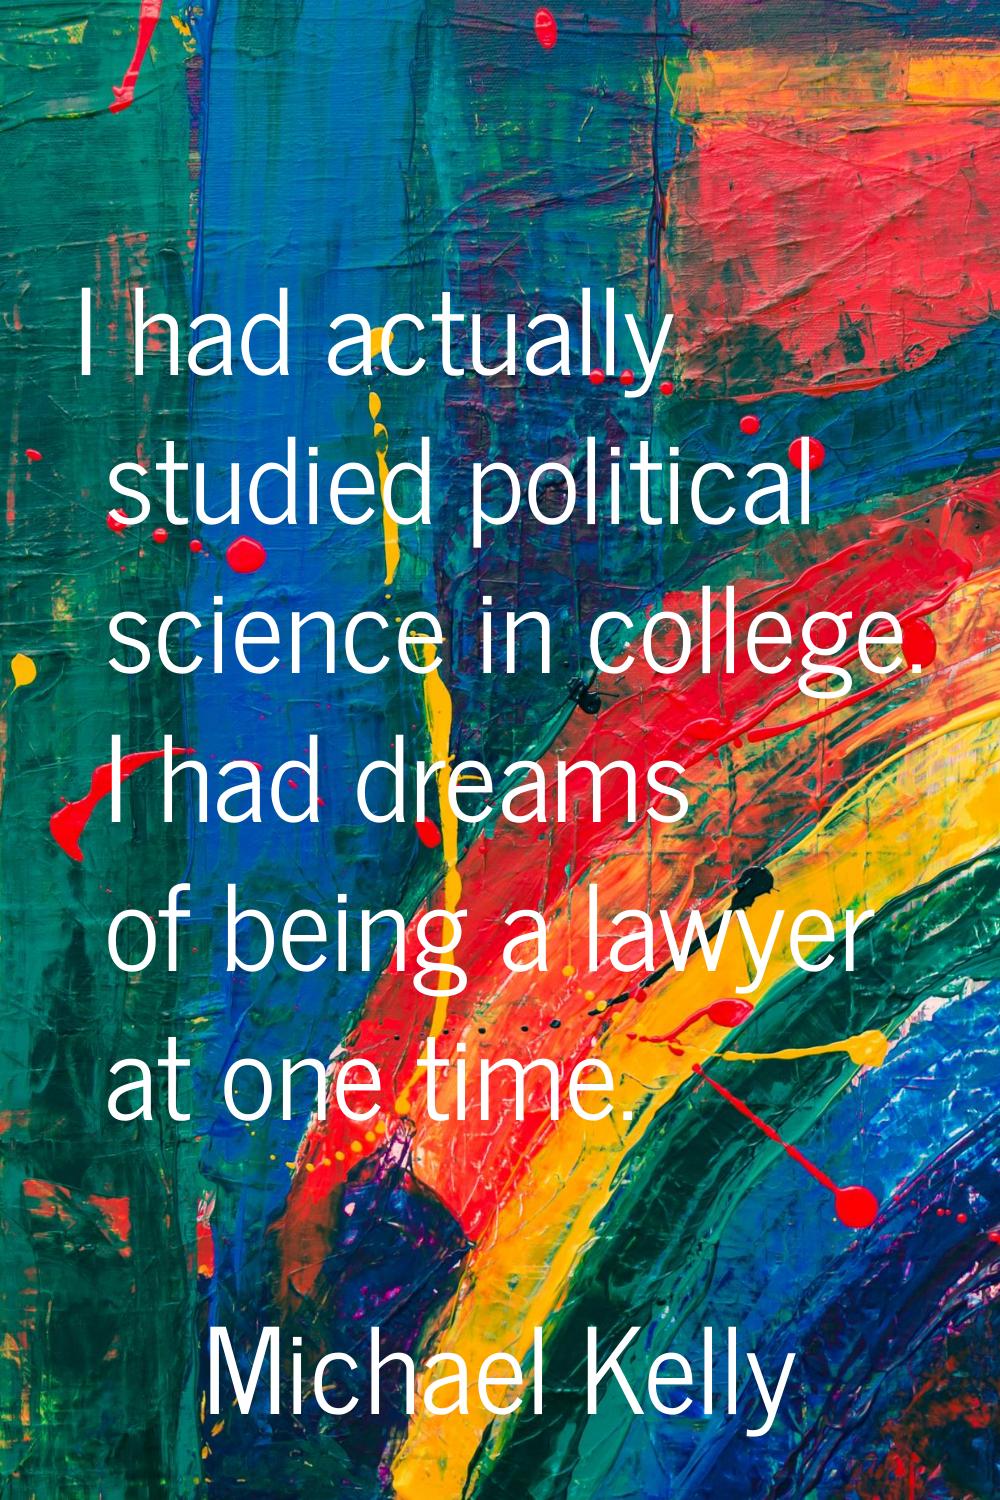 I had actually studied political science in college. I had dreams of being a lawyer at one time.